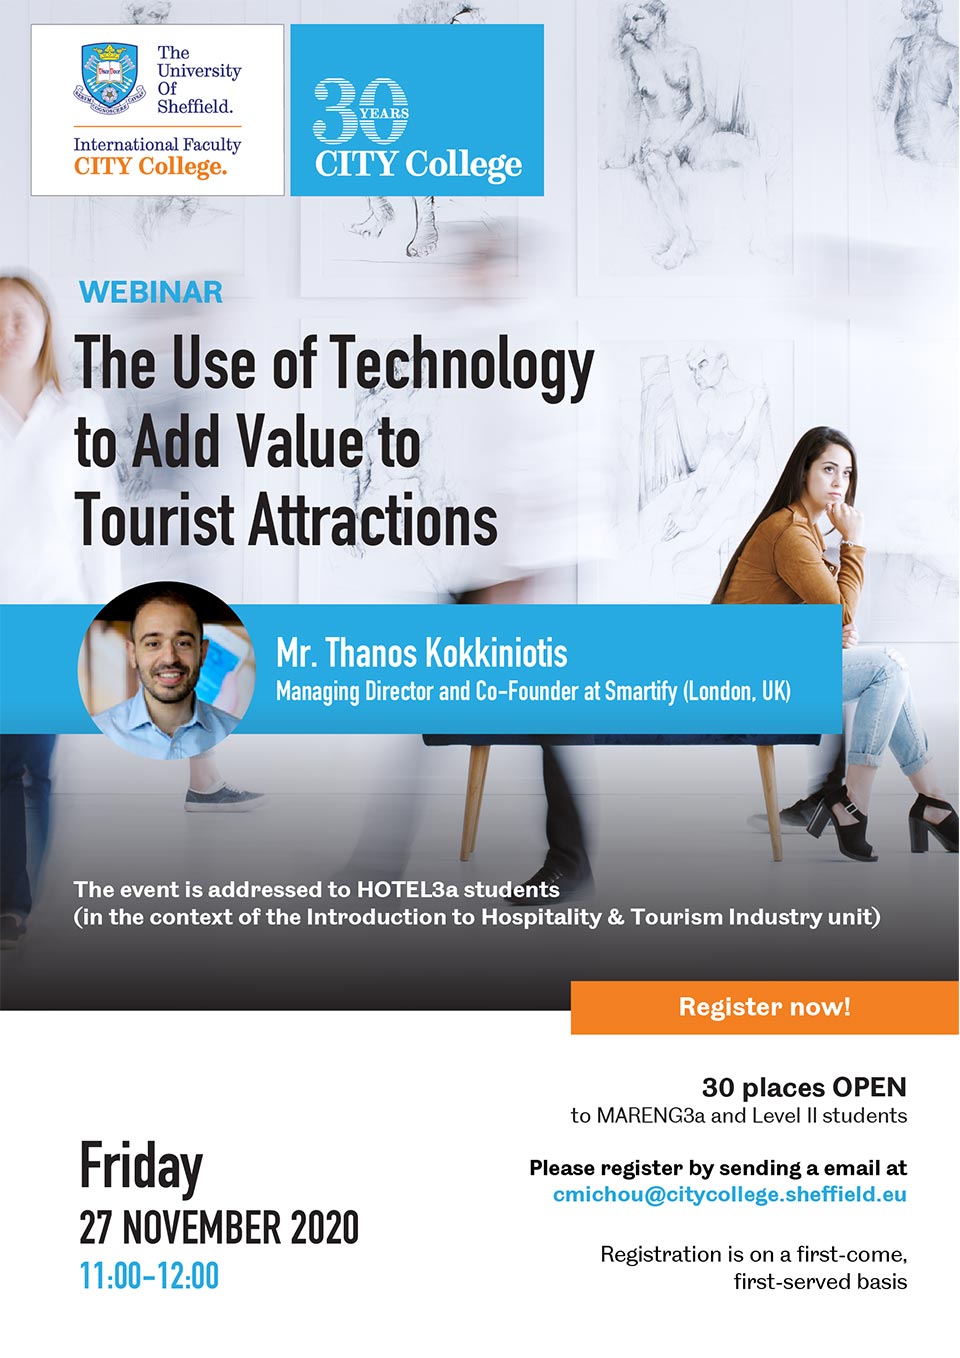 The Use of Technology to Add Value to Tourist Attractions Webinar